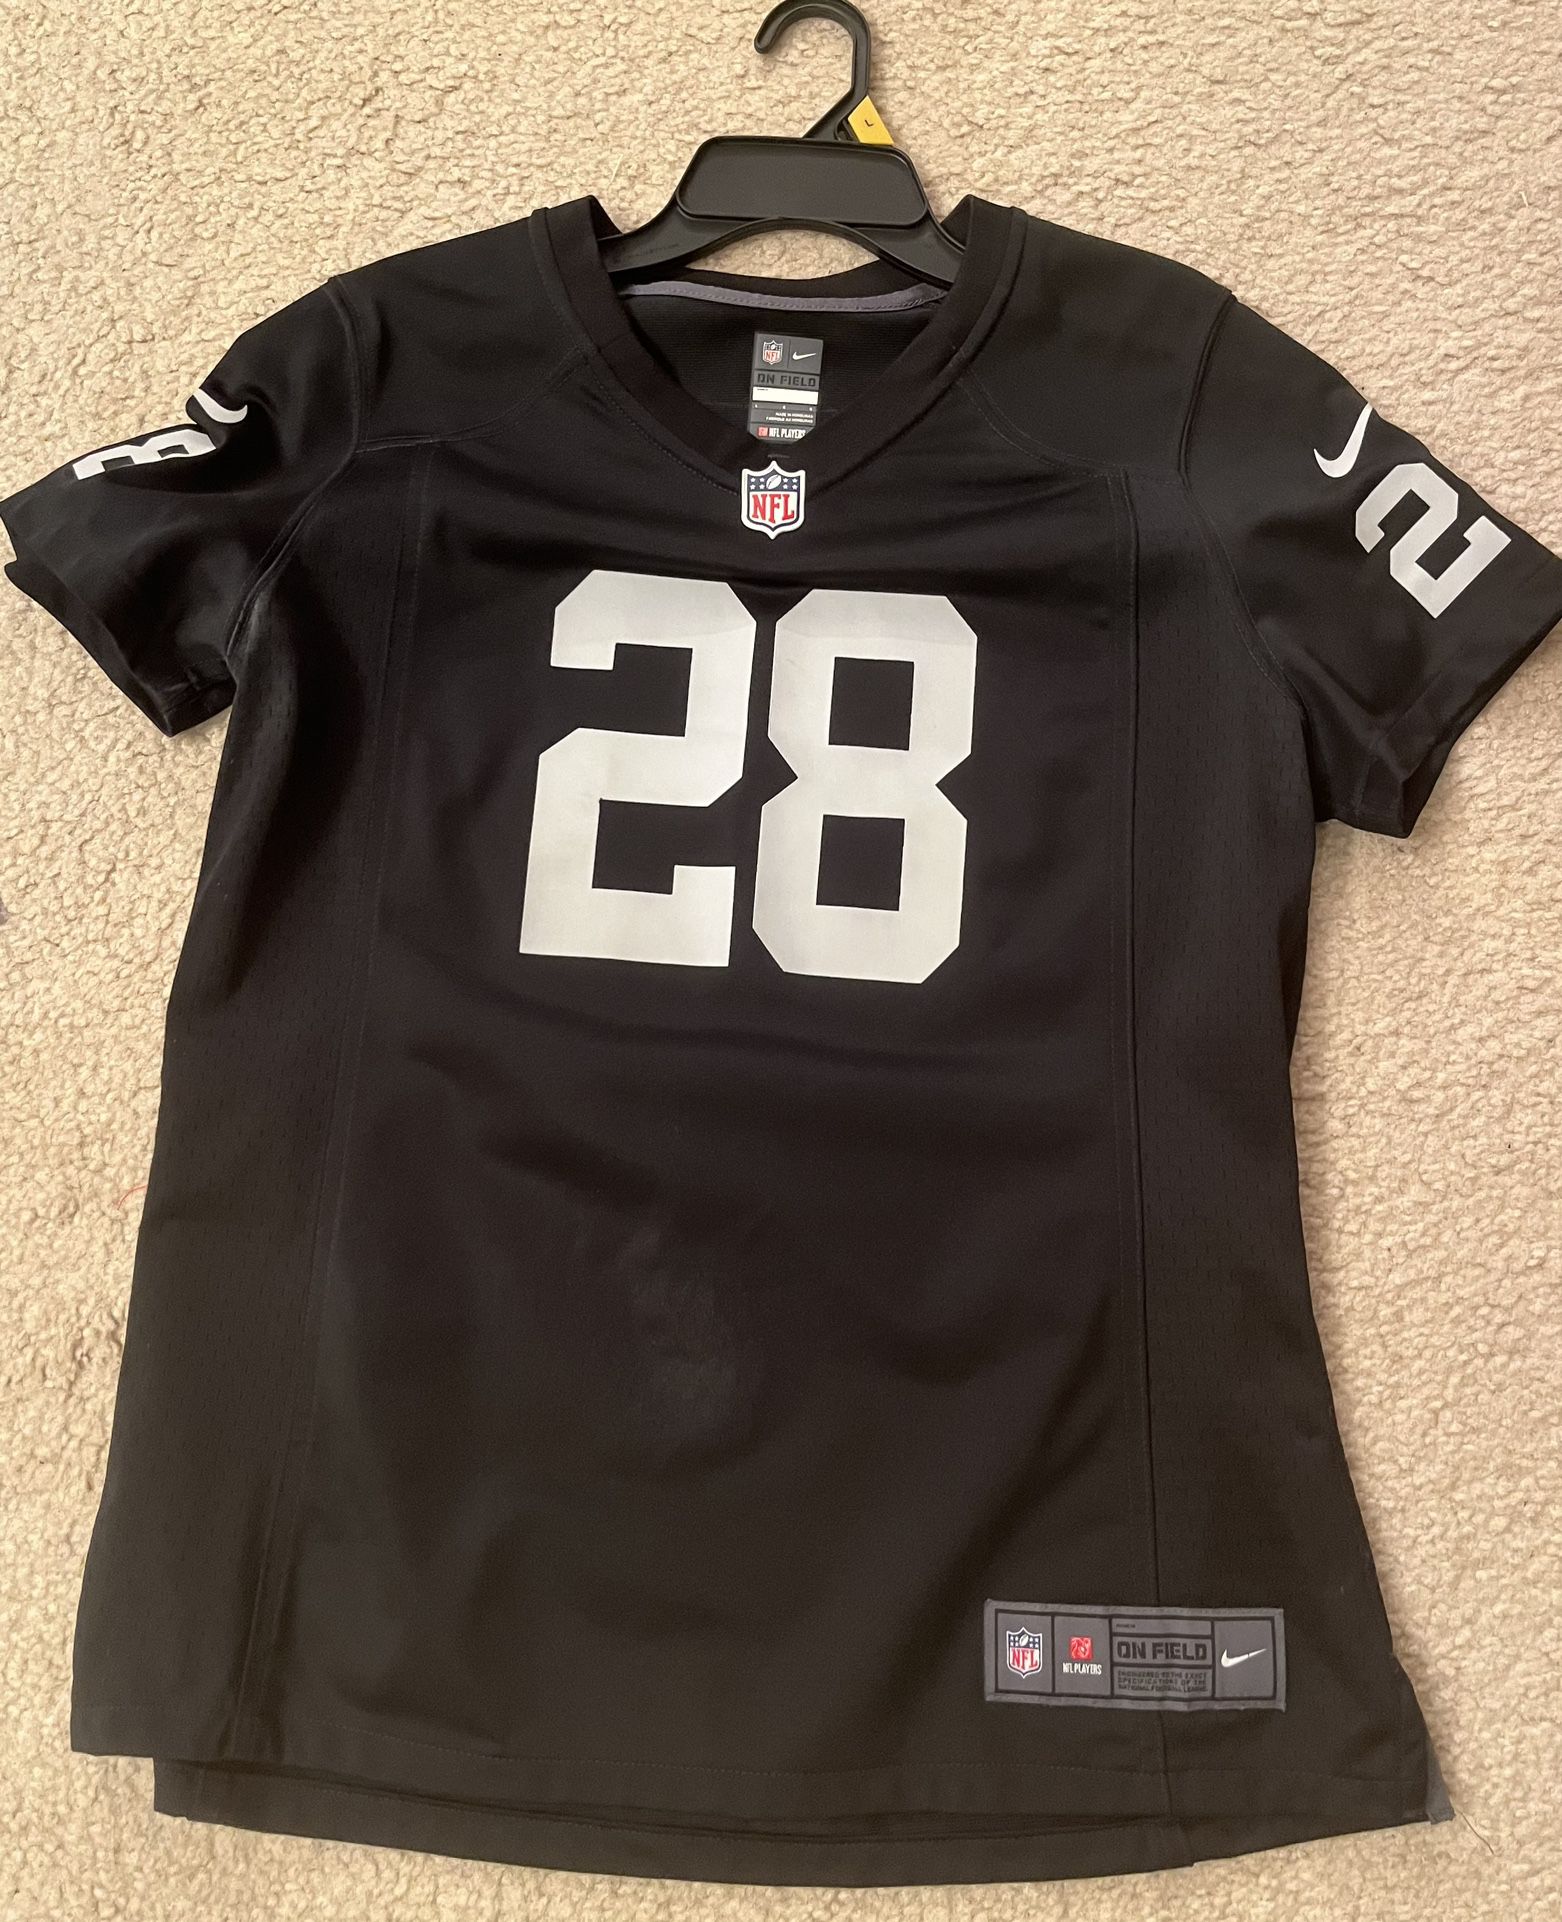 Woman’s Authentic Nike Raiders Jersey 